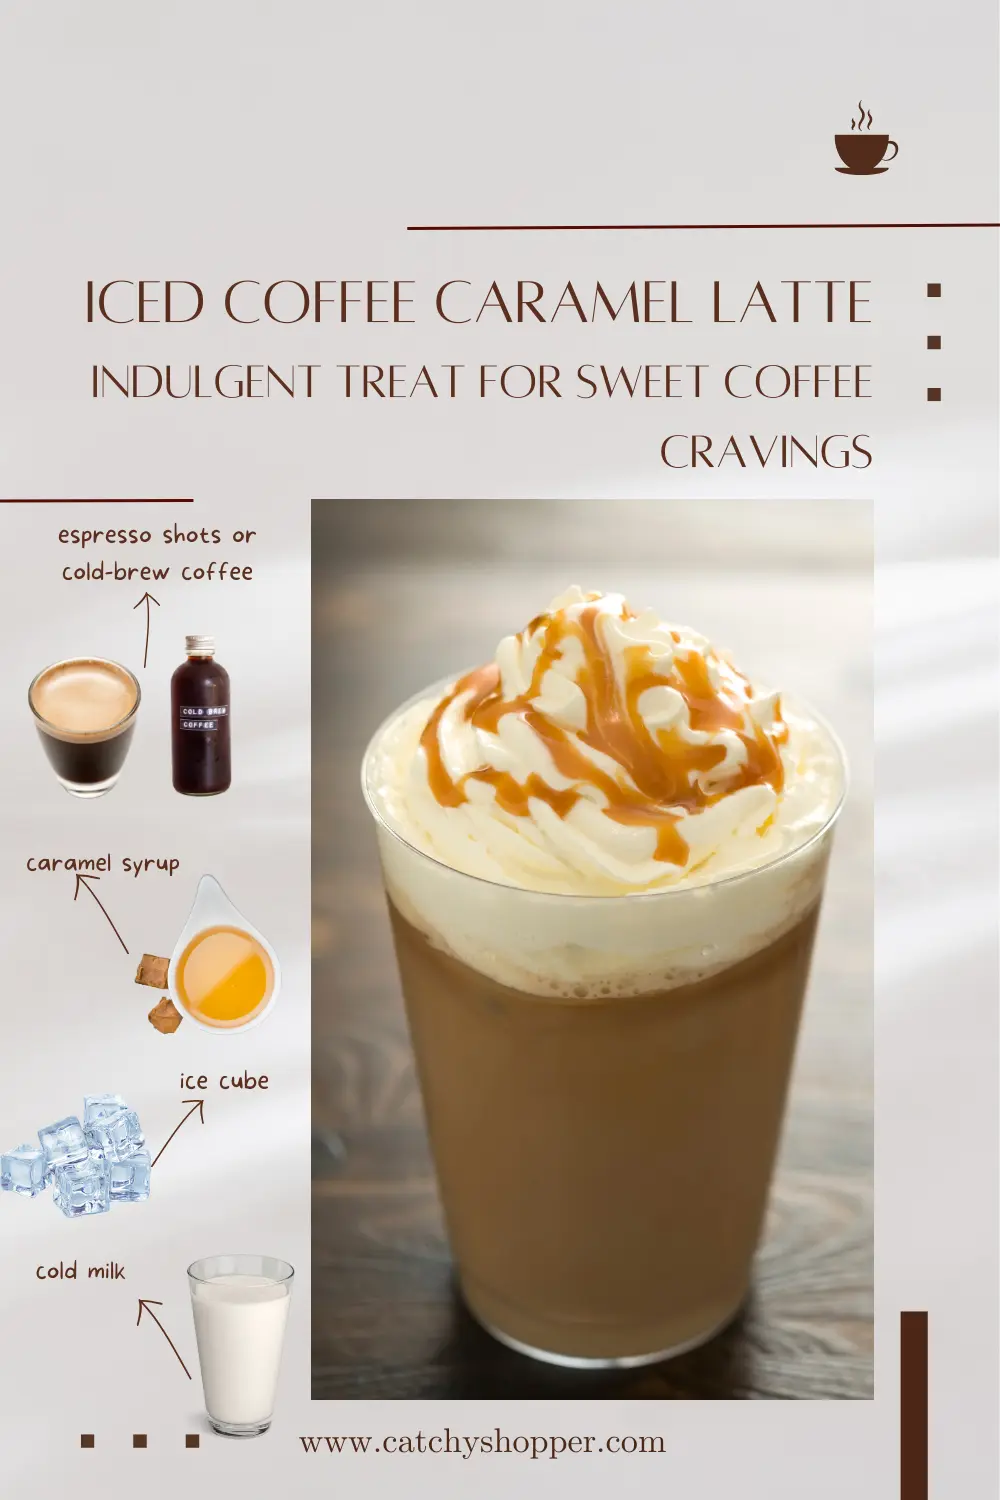 ic iced coffee spiked latte